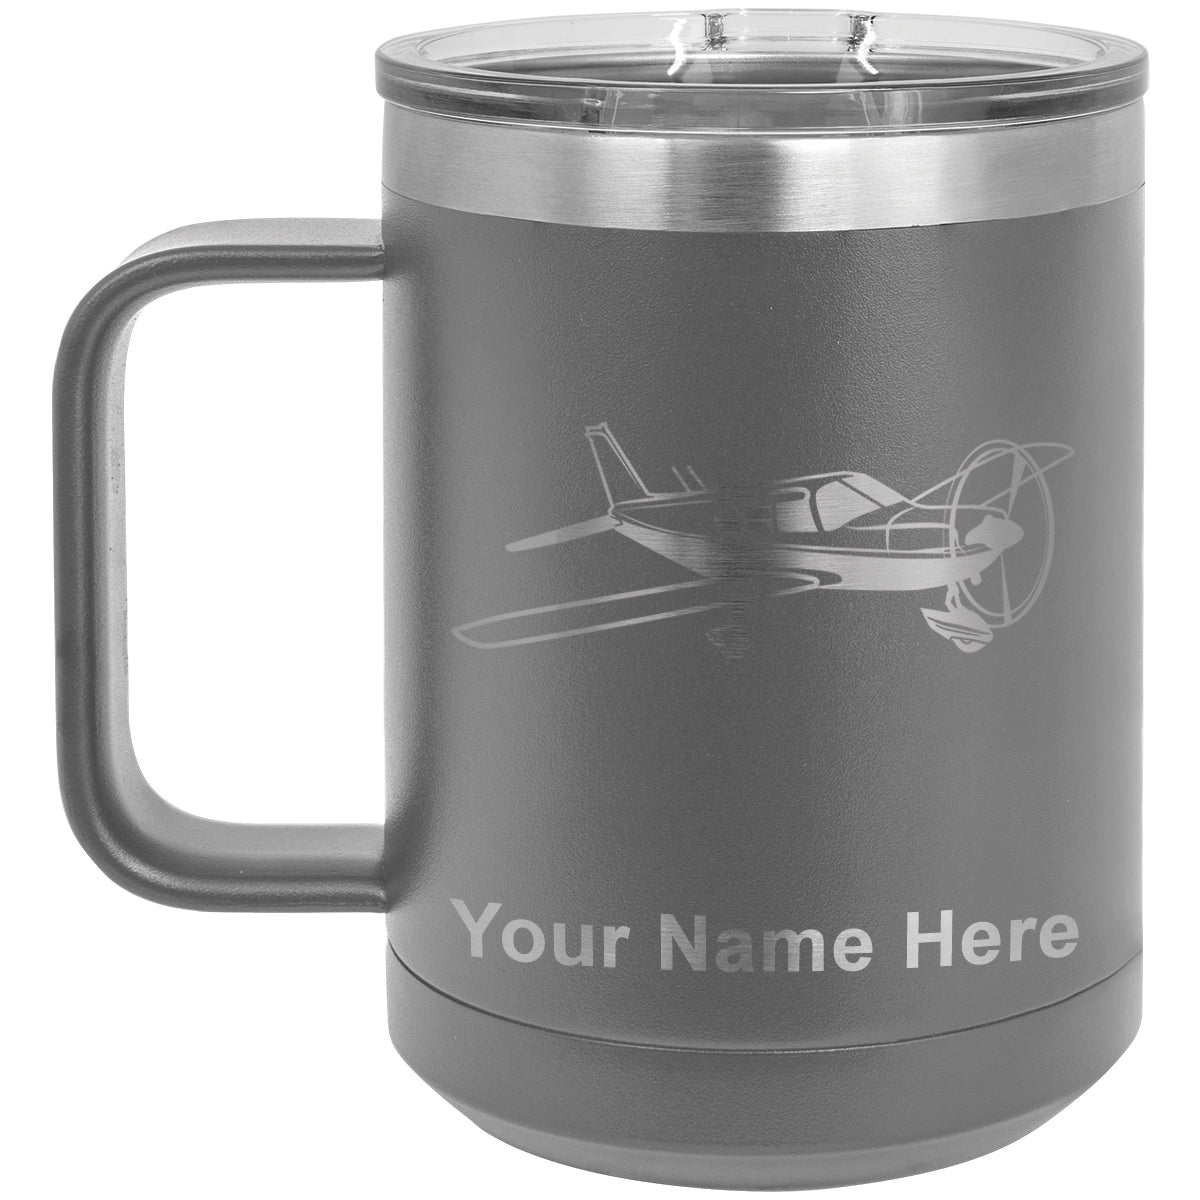 15oz Vacuum Insulated Coffee Mug, Low Wing Airplane, Personalized Engraving Included